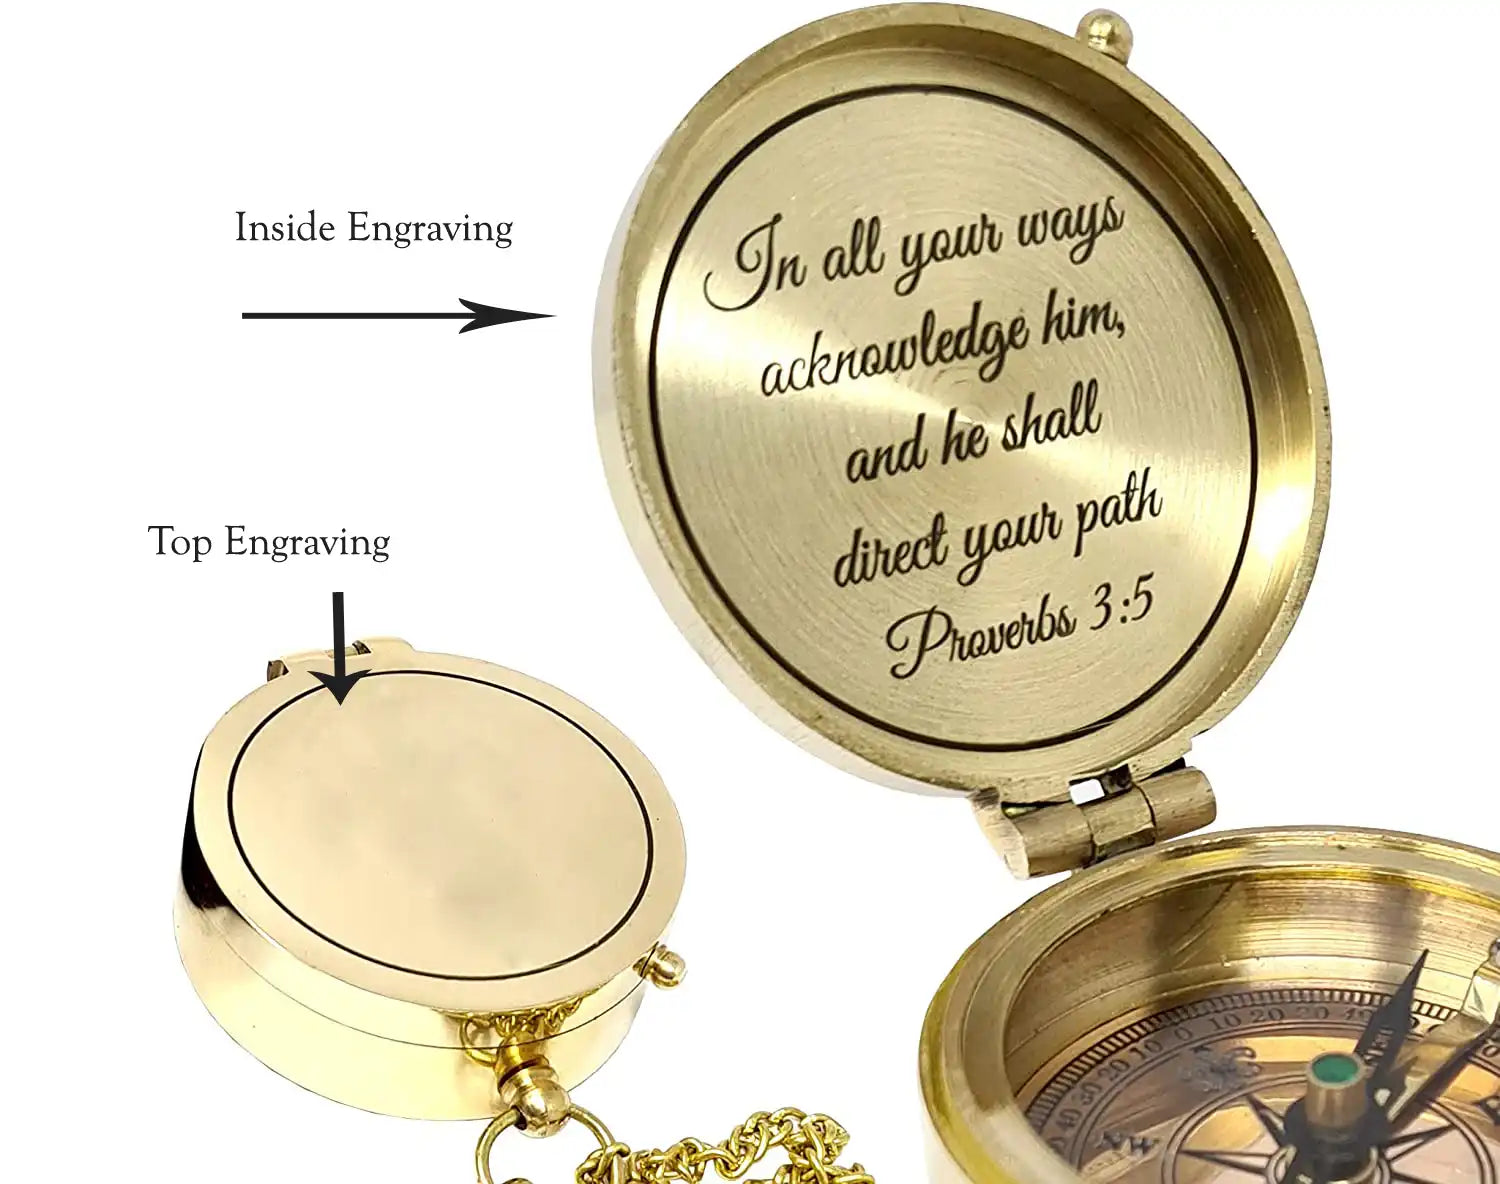 God's Path Compass, Religious Gifts, Christian Gifts for Men, Catholic Gifts, Baptism Gifts for Boy